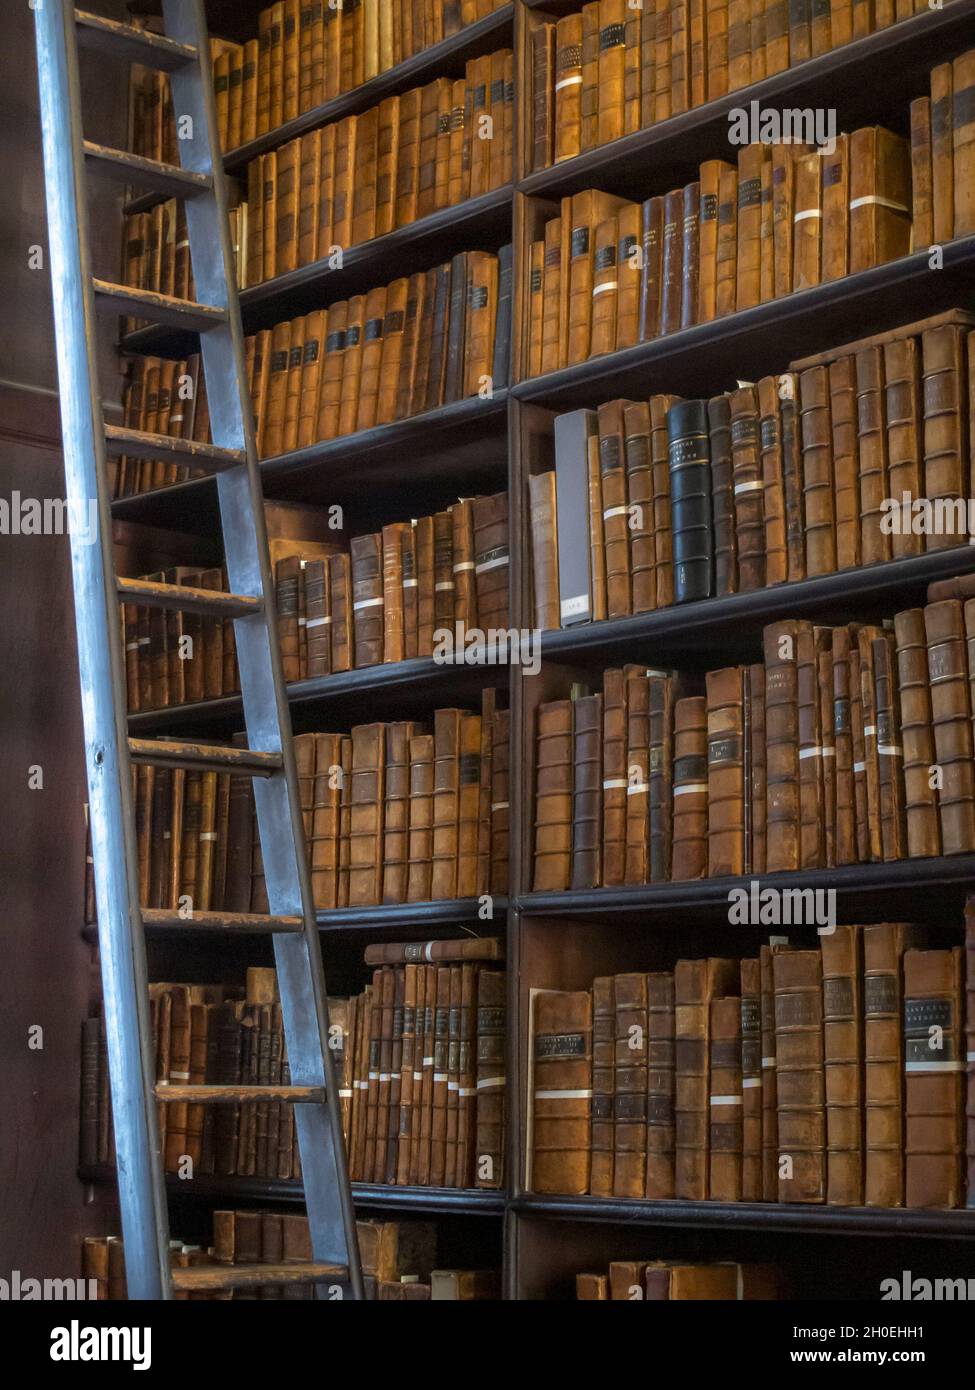 Book shelves at the Long Room Library in Trinity College Dublin Ireland  Stock Photo - Alamy